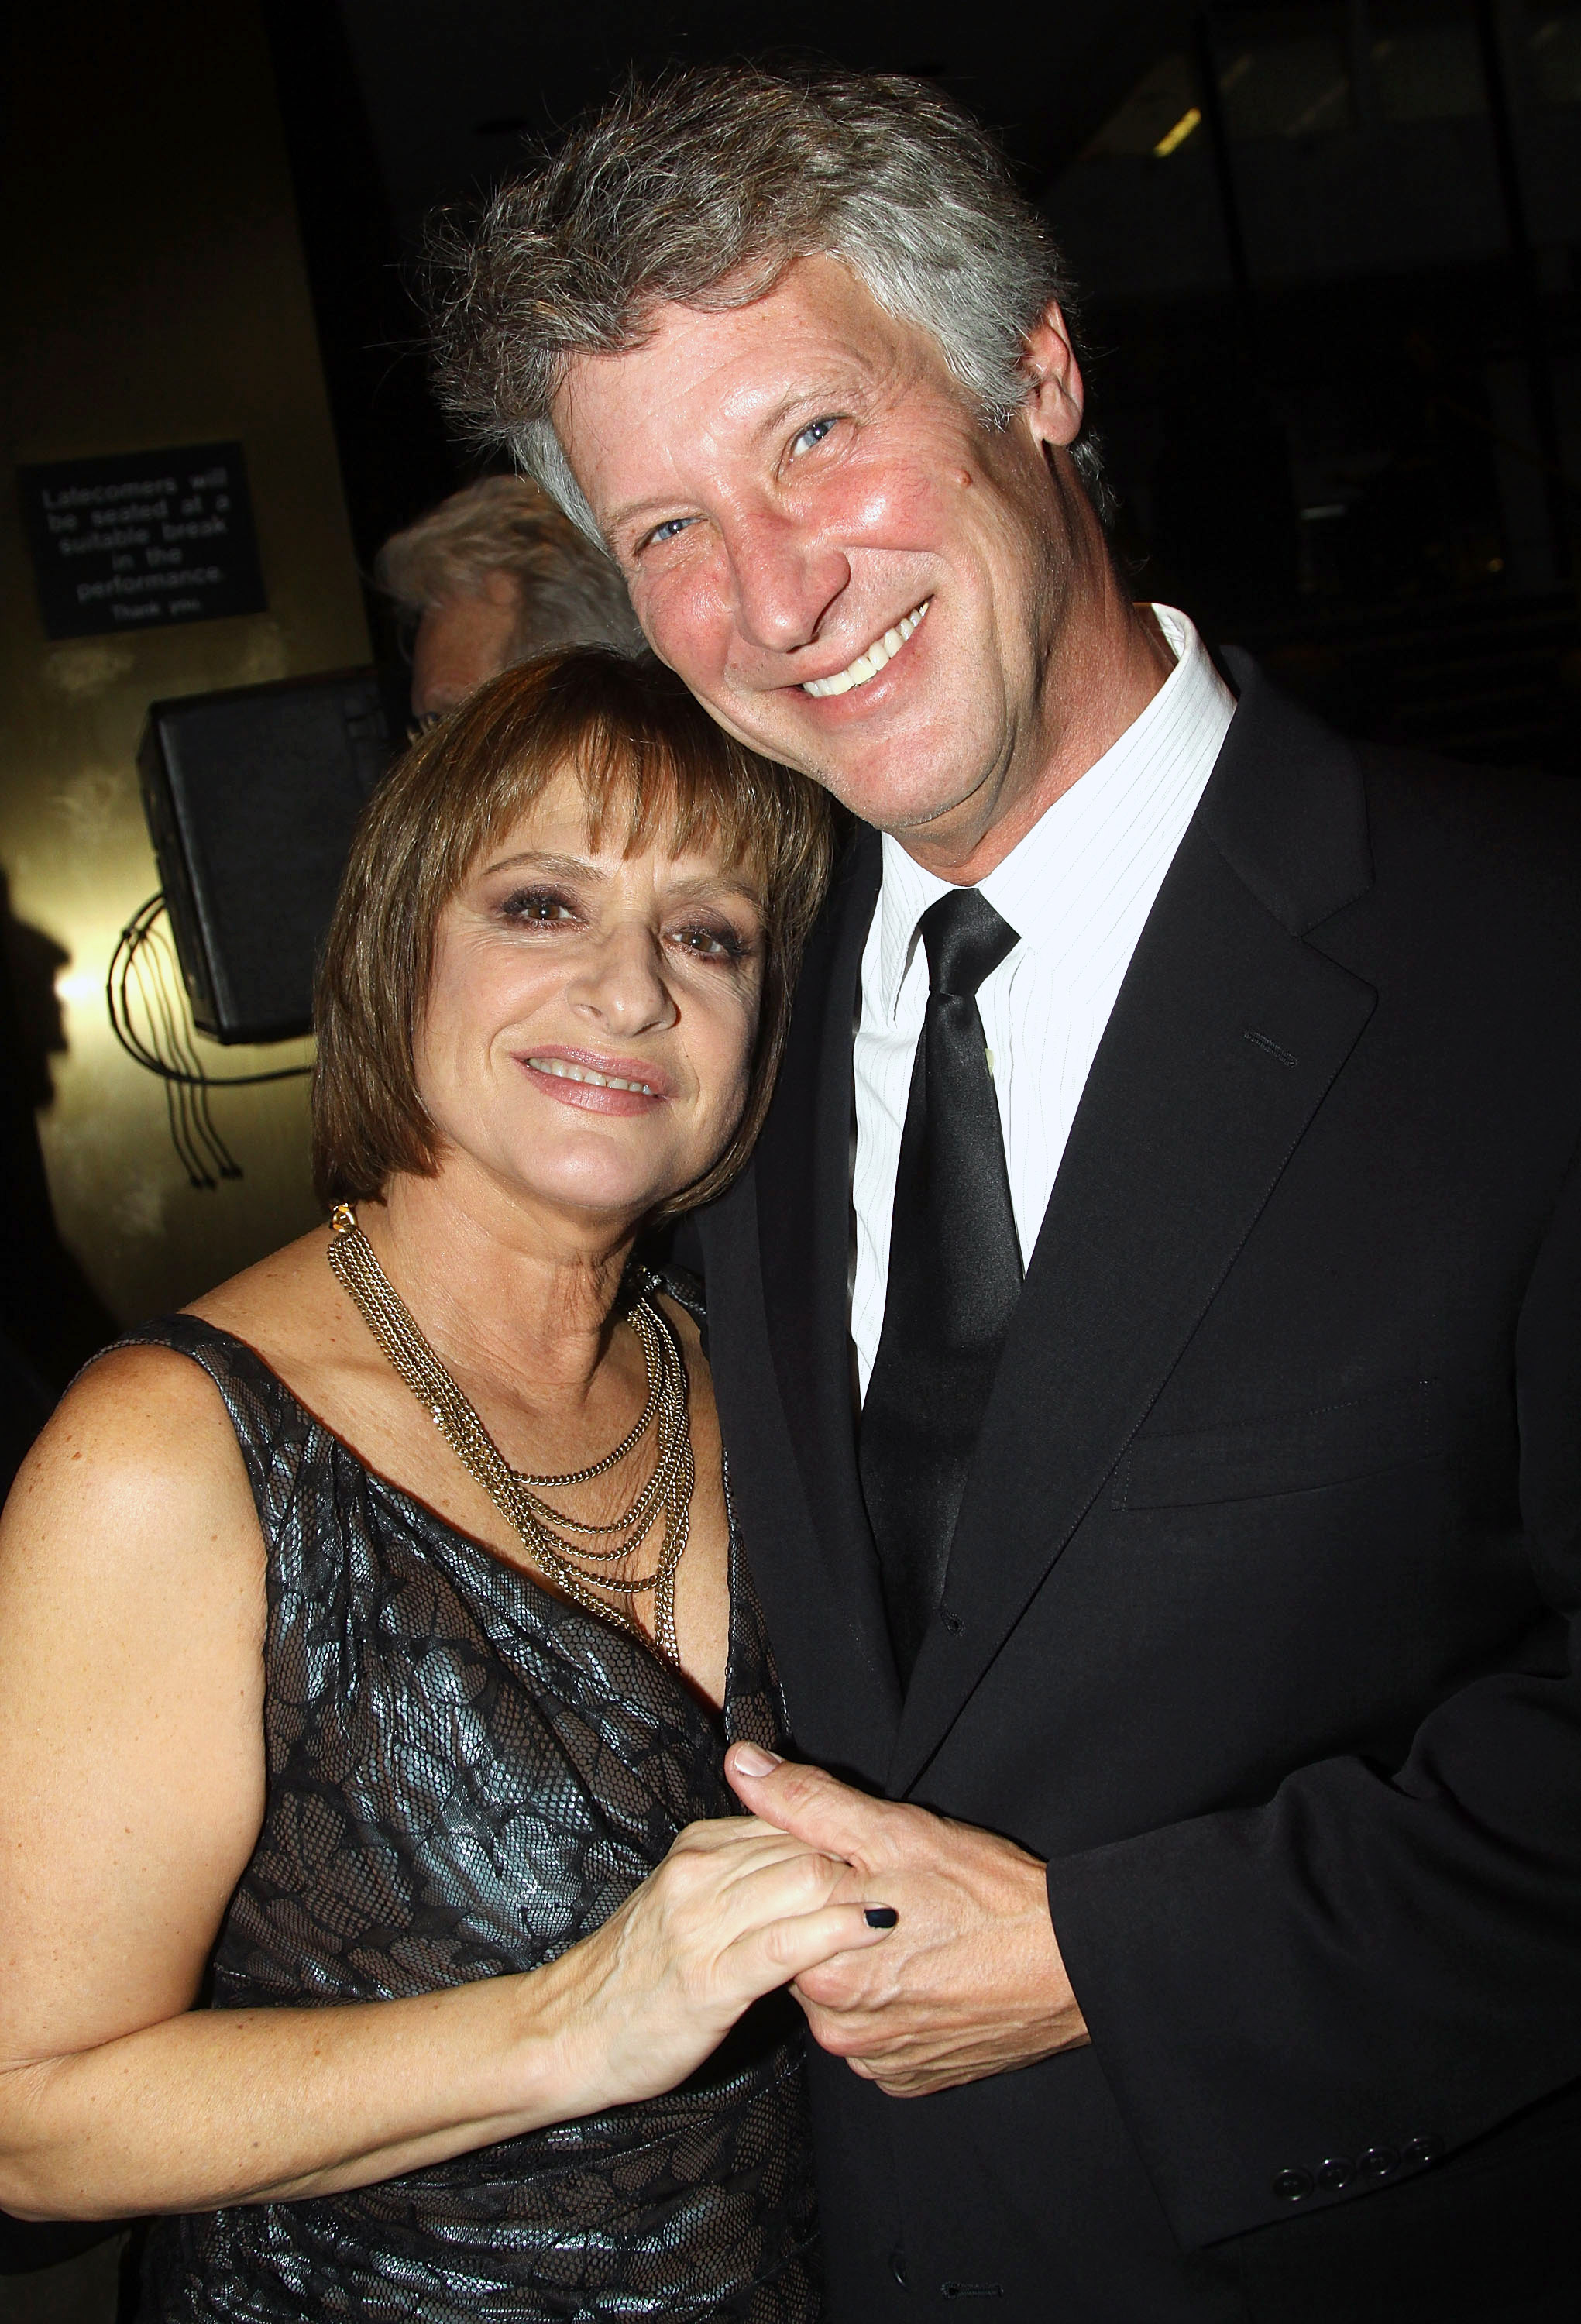 Patti LuPone and Matthew Johnston pose at the "Patti LuPone: A Memoir" Book Launch Party at Vivian Beaumont Theatre at Lincoln Center on September 14, 2010, in New York City | Source: Getty Images